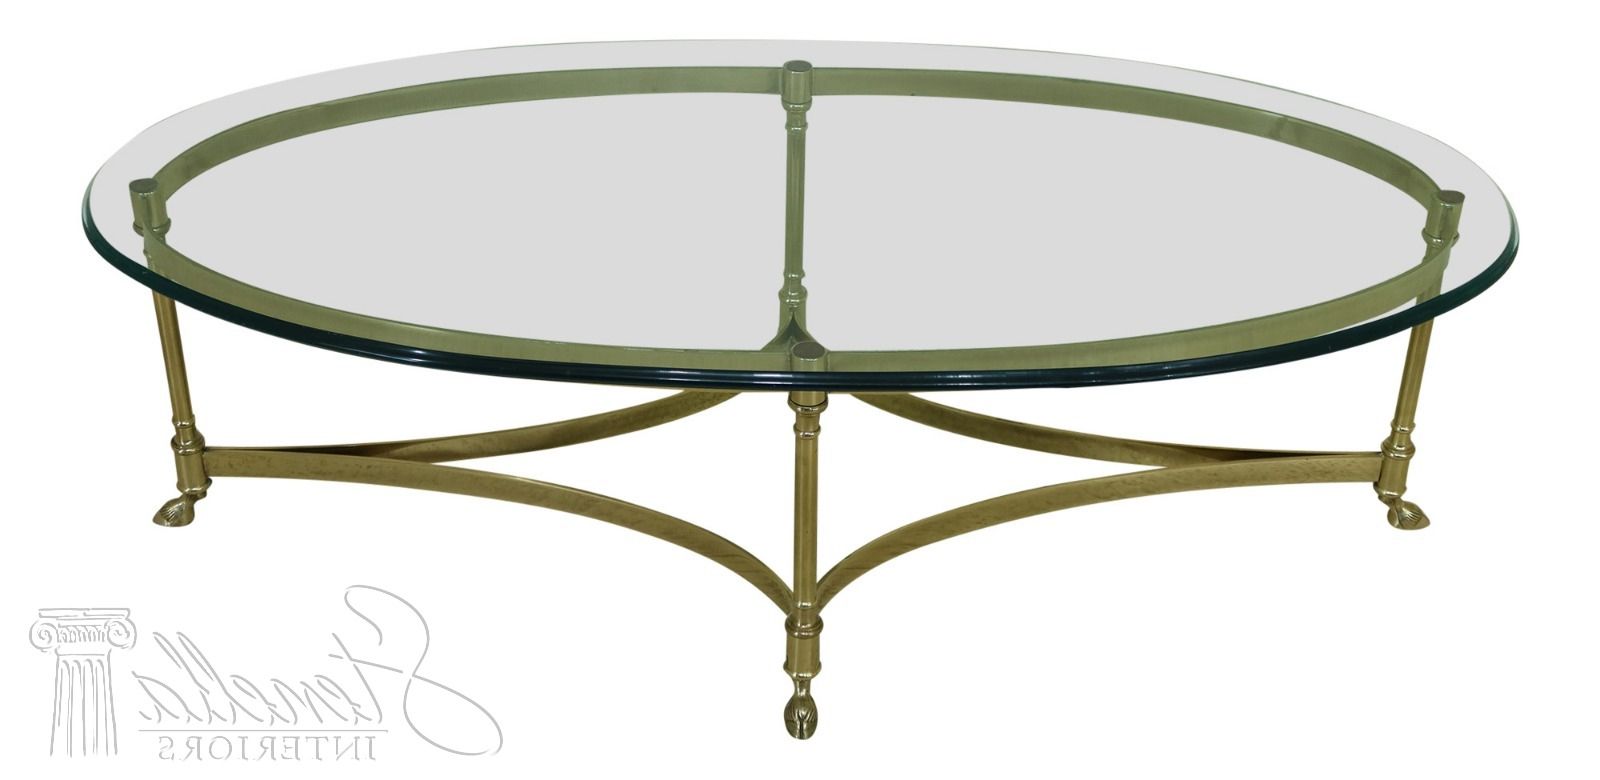 Best And Newest 32017ec: Labarge Oval Brass & Glass Regency Coffee Table Inside Glass And Gold Oval Coffee Tables (View 3 of 20)